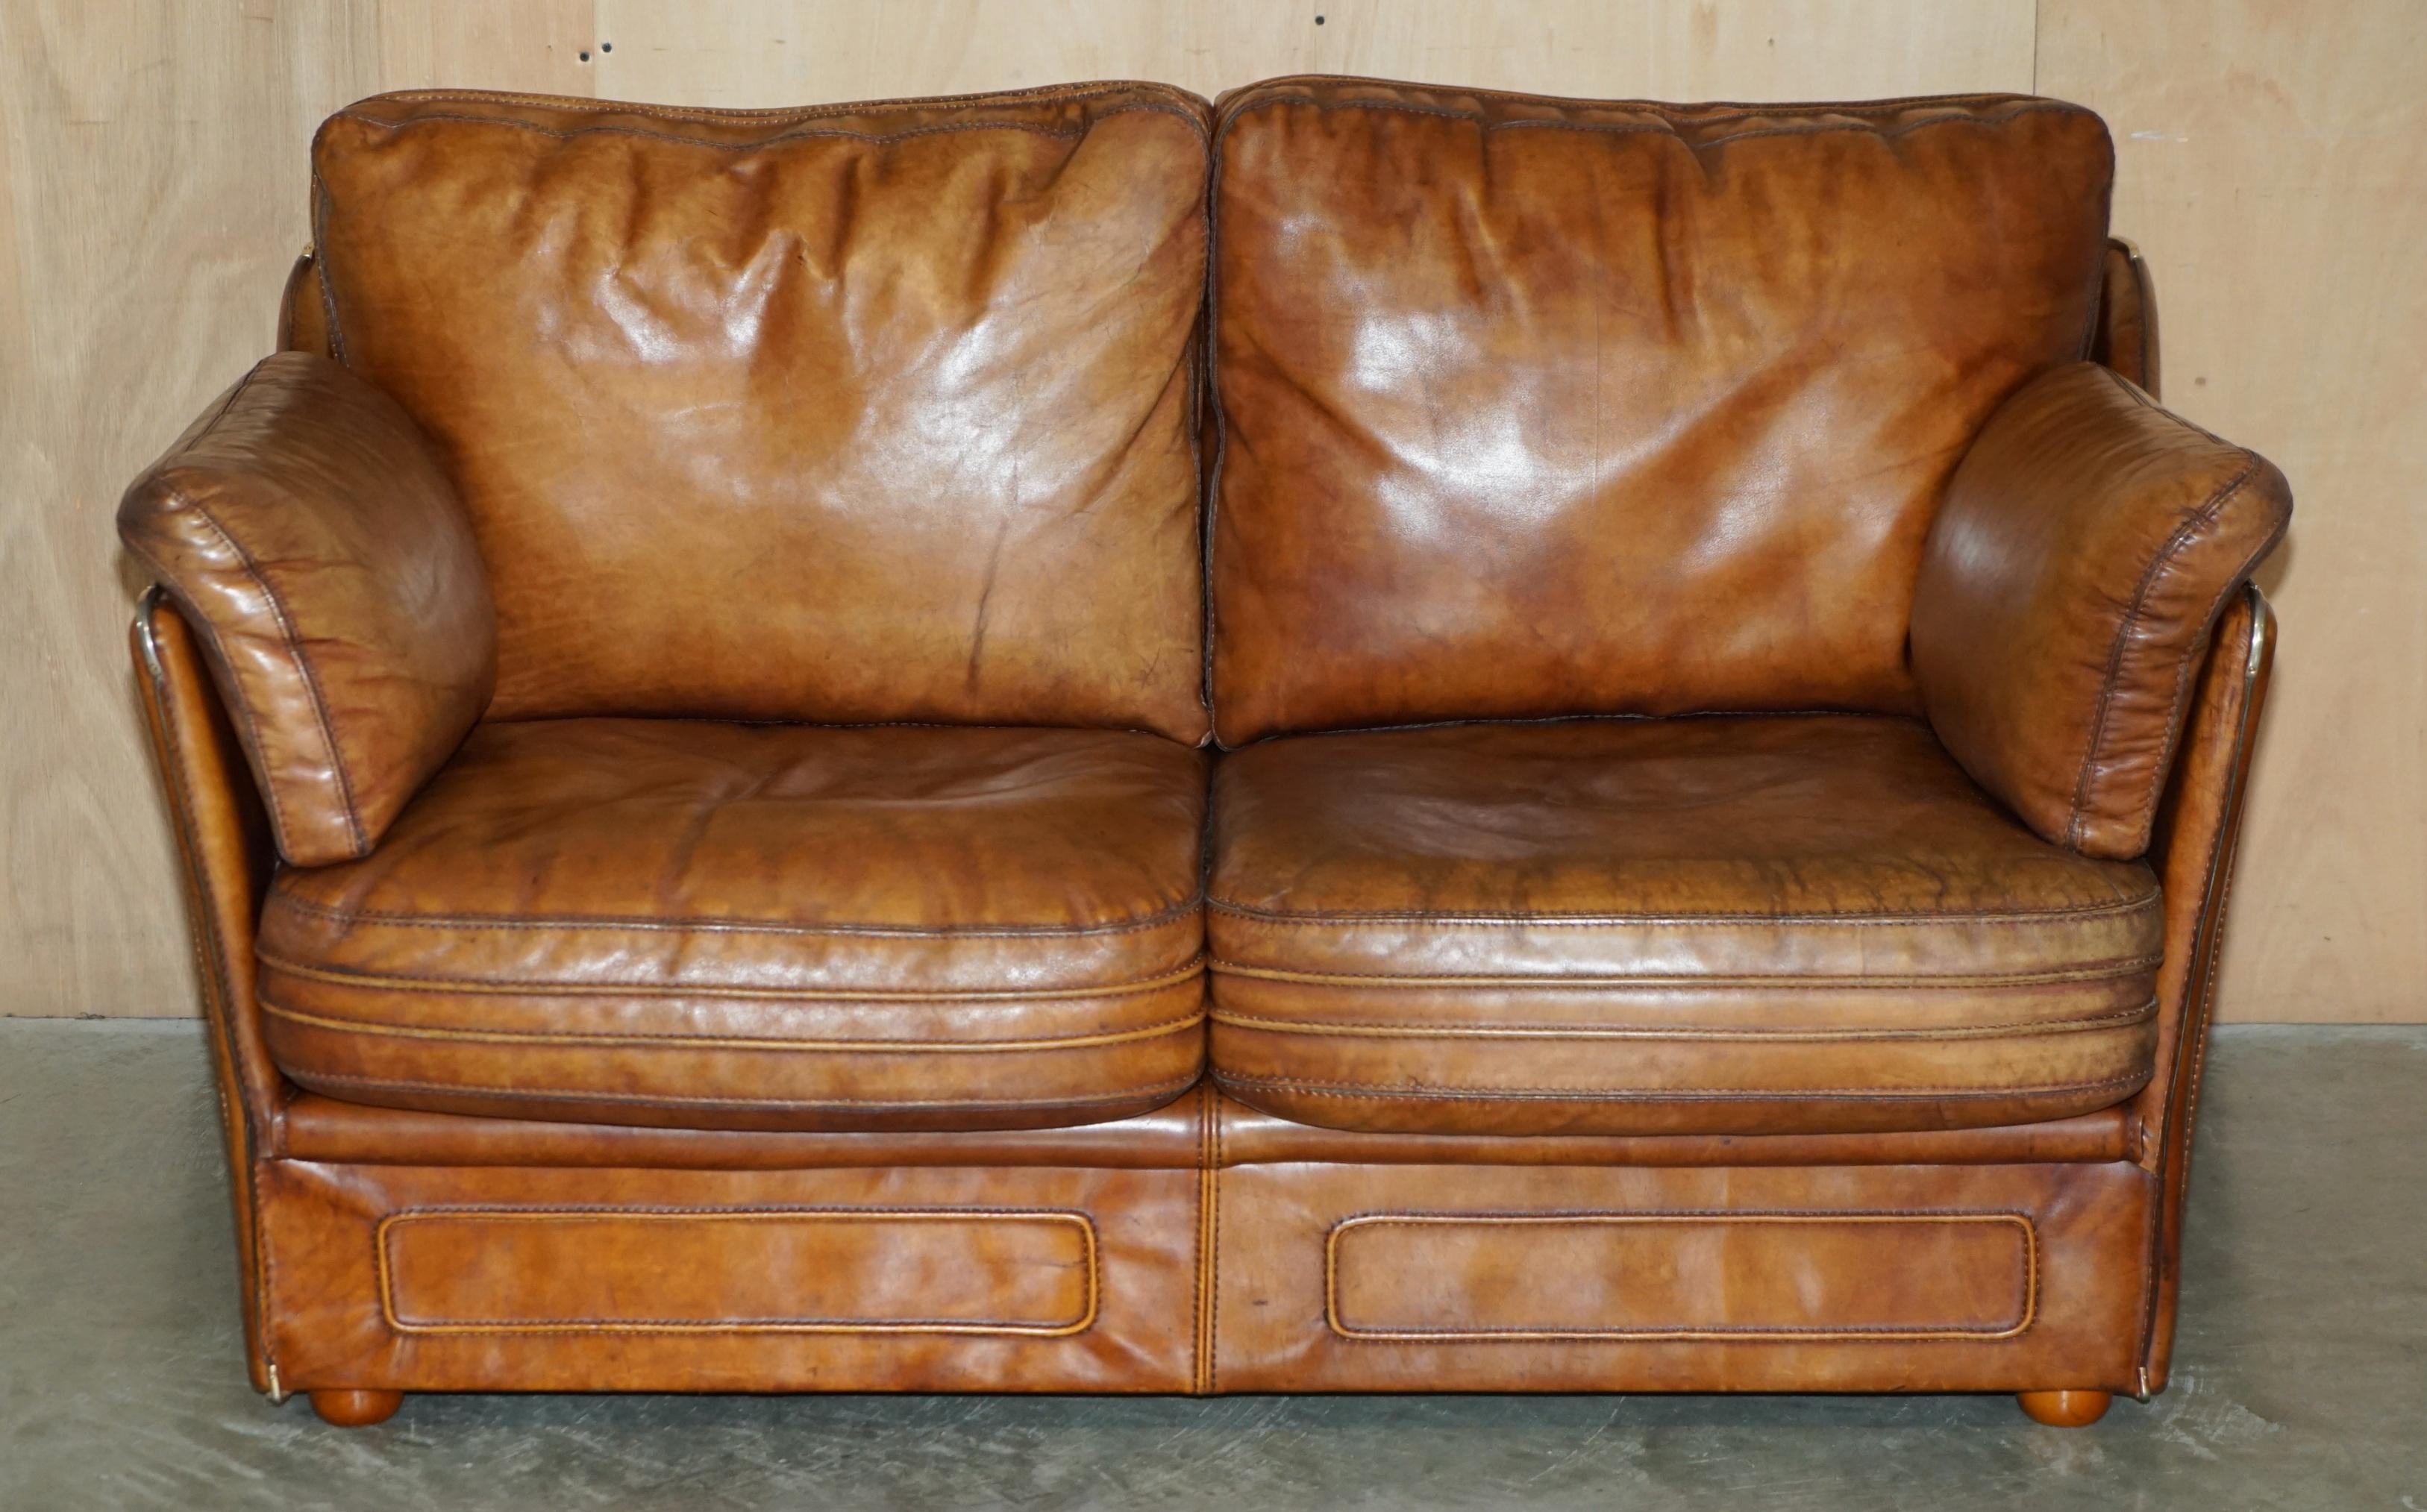 Royal House Antiques

Royal House Antiques is delighted to offer for sale this very cool and highly collectable Roche Bobois Mid Century Modern aged brown leather two seat sofa 

Please note the delivery fee listed is just a guide, it covers within